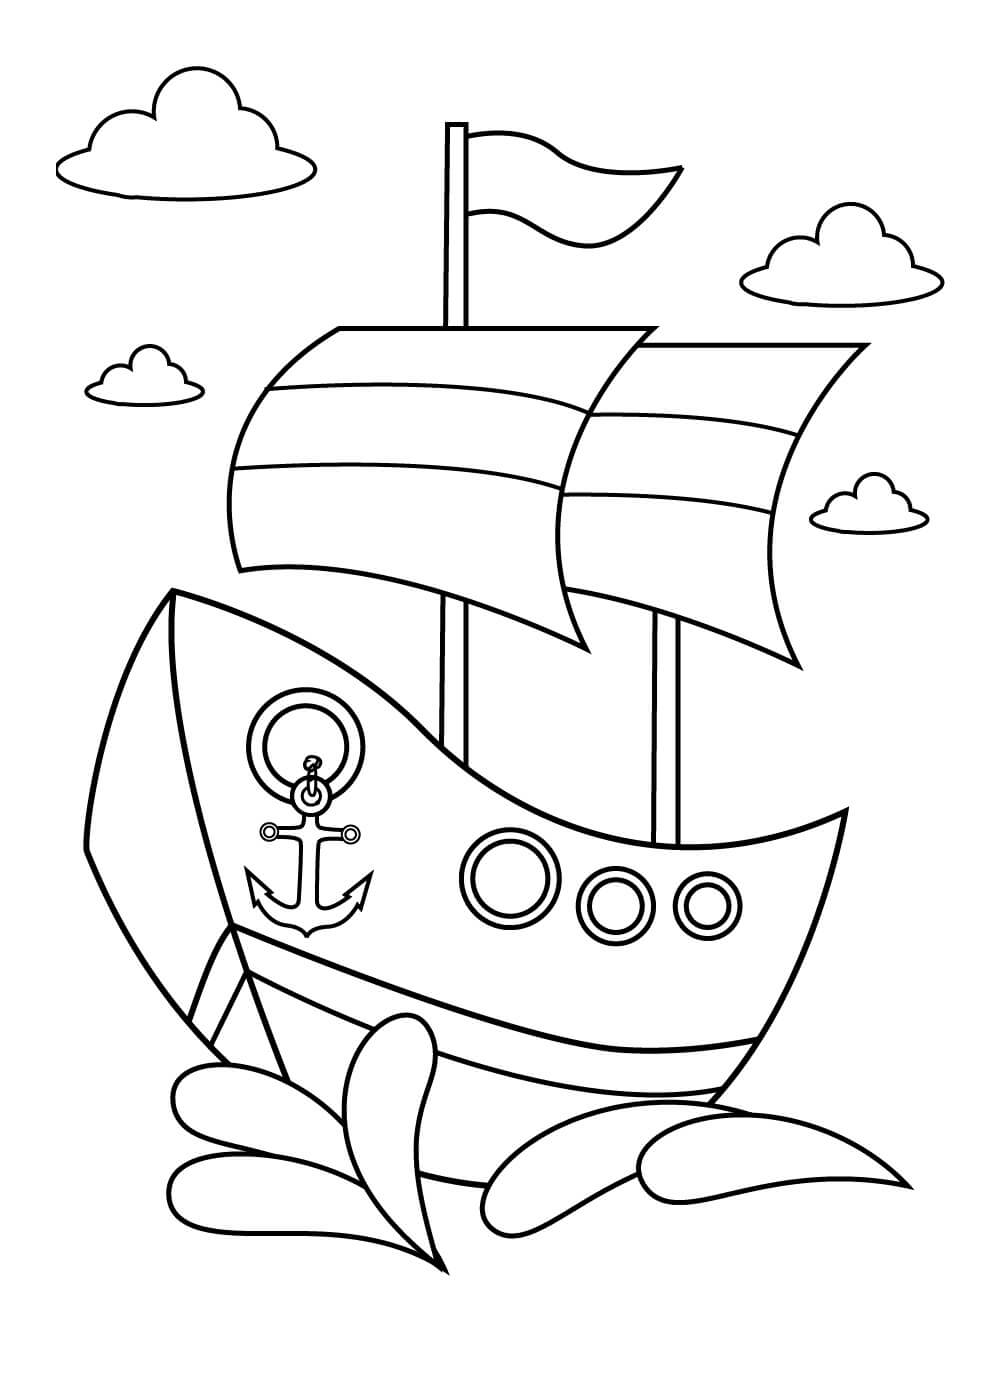 Pirate Ship with Clouds